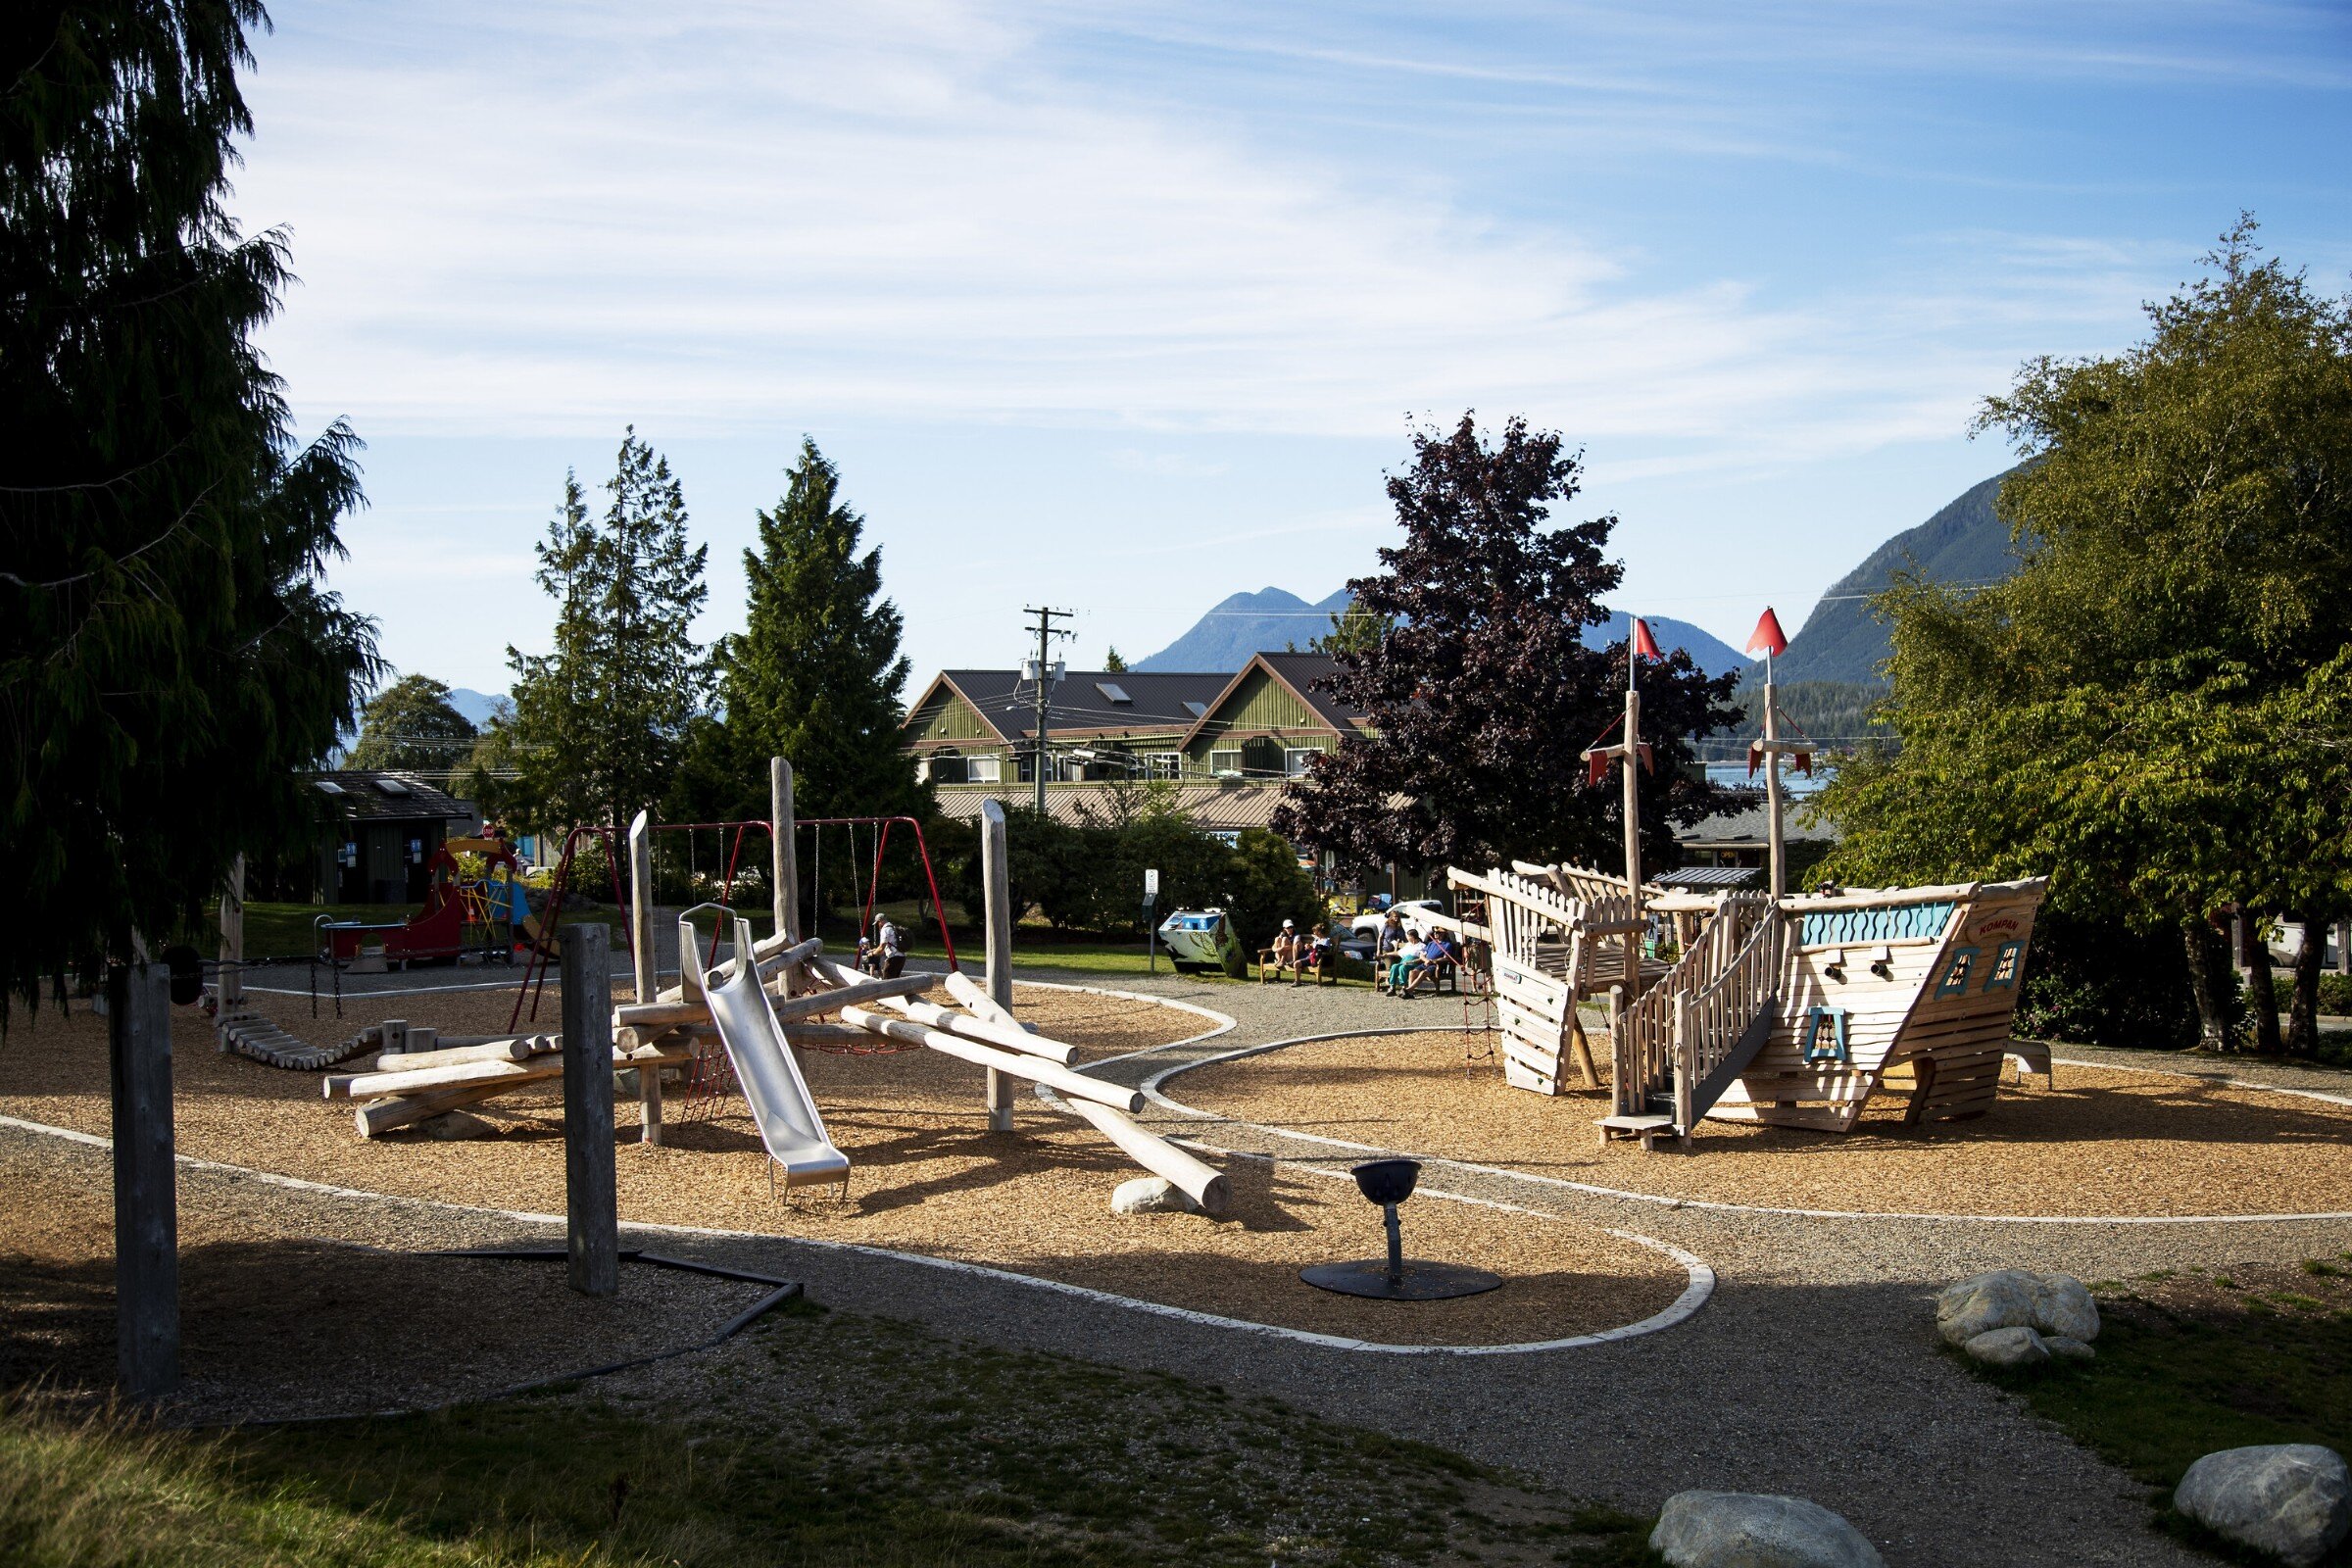 Playground for kids with a slide, swings and a wooden fort